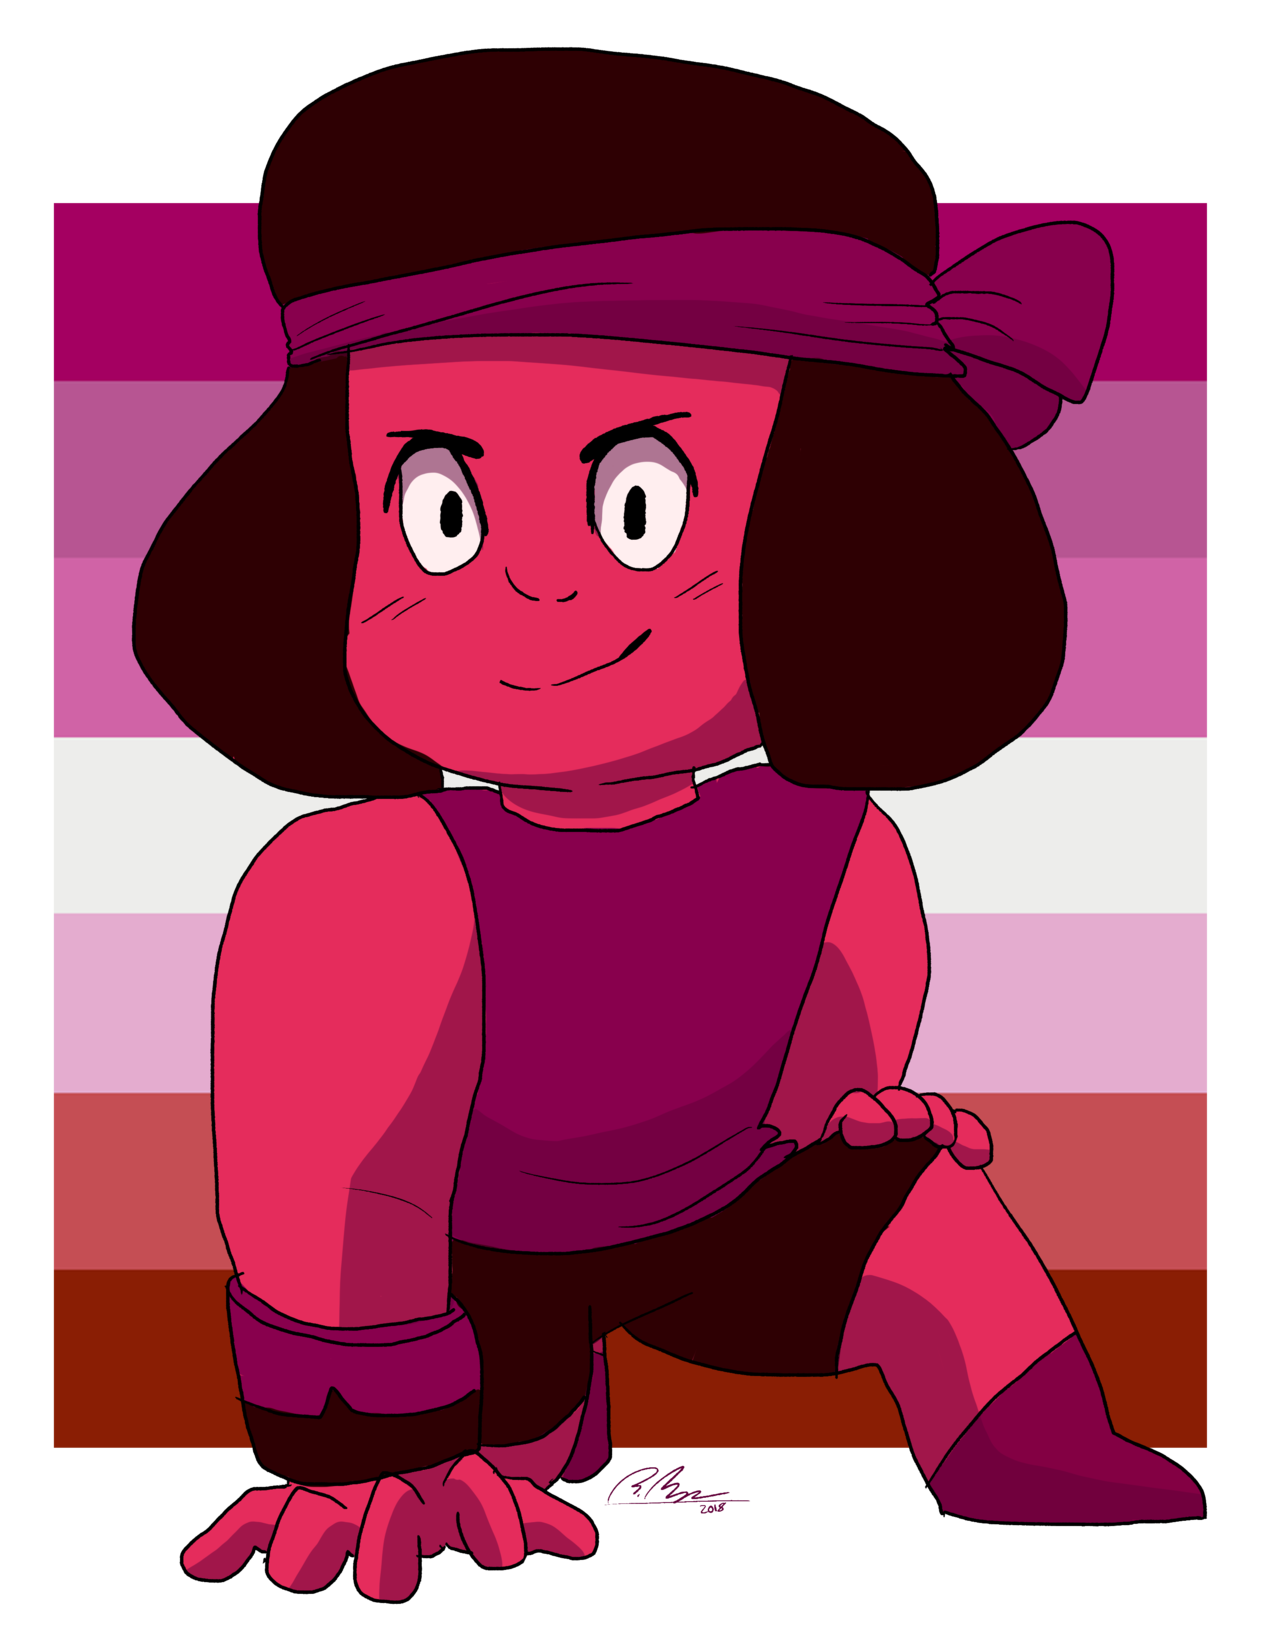 pride month day 6! our favourite fire lesbian c: